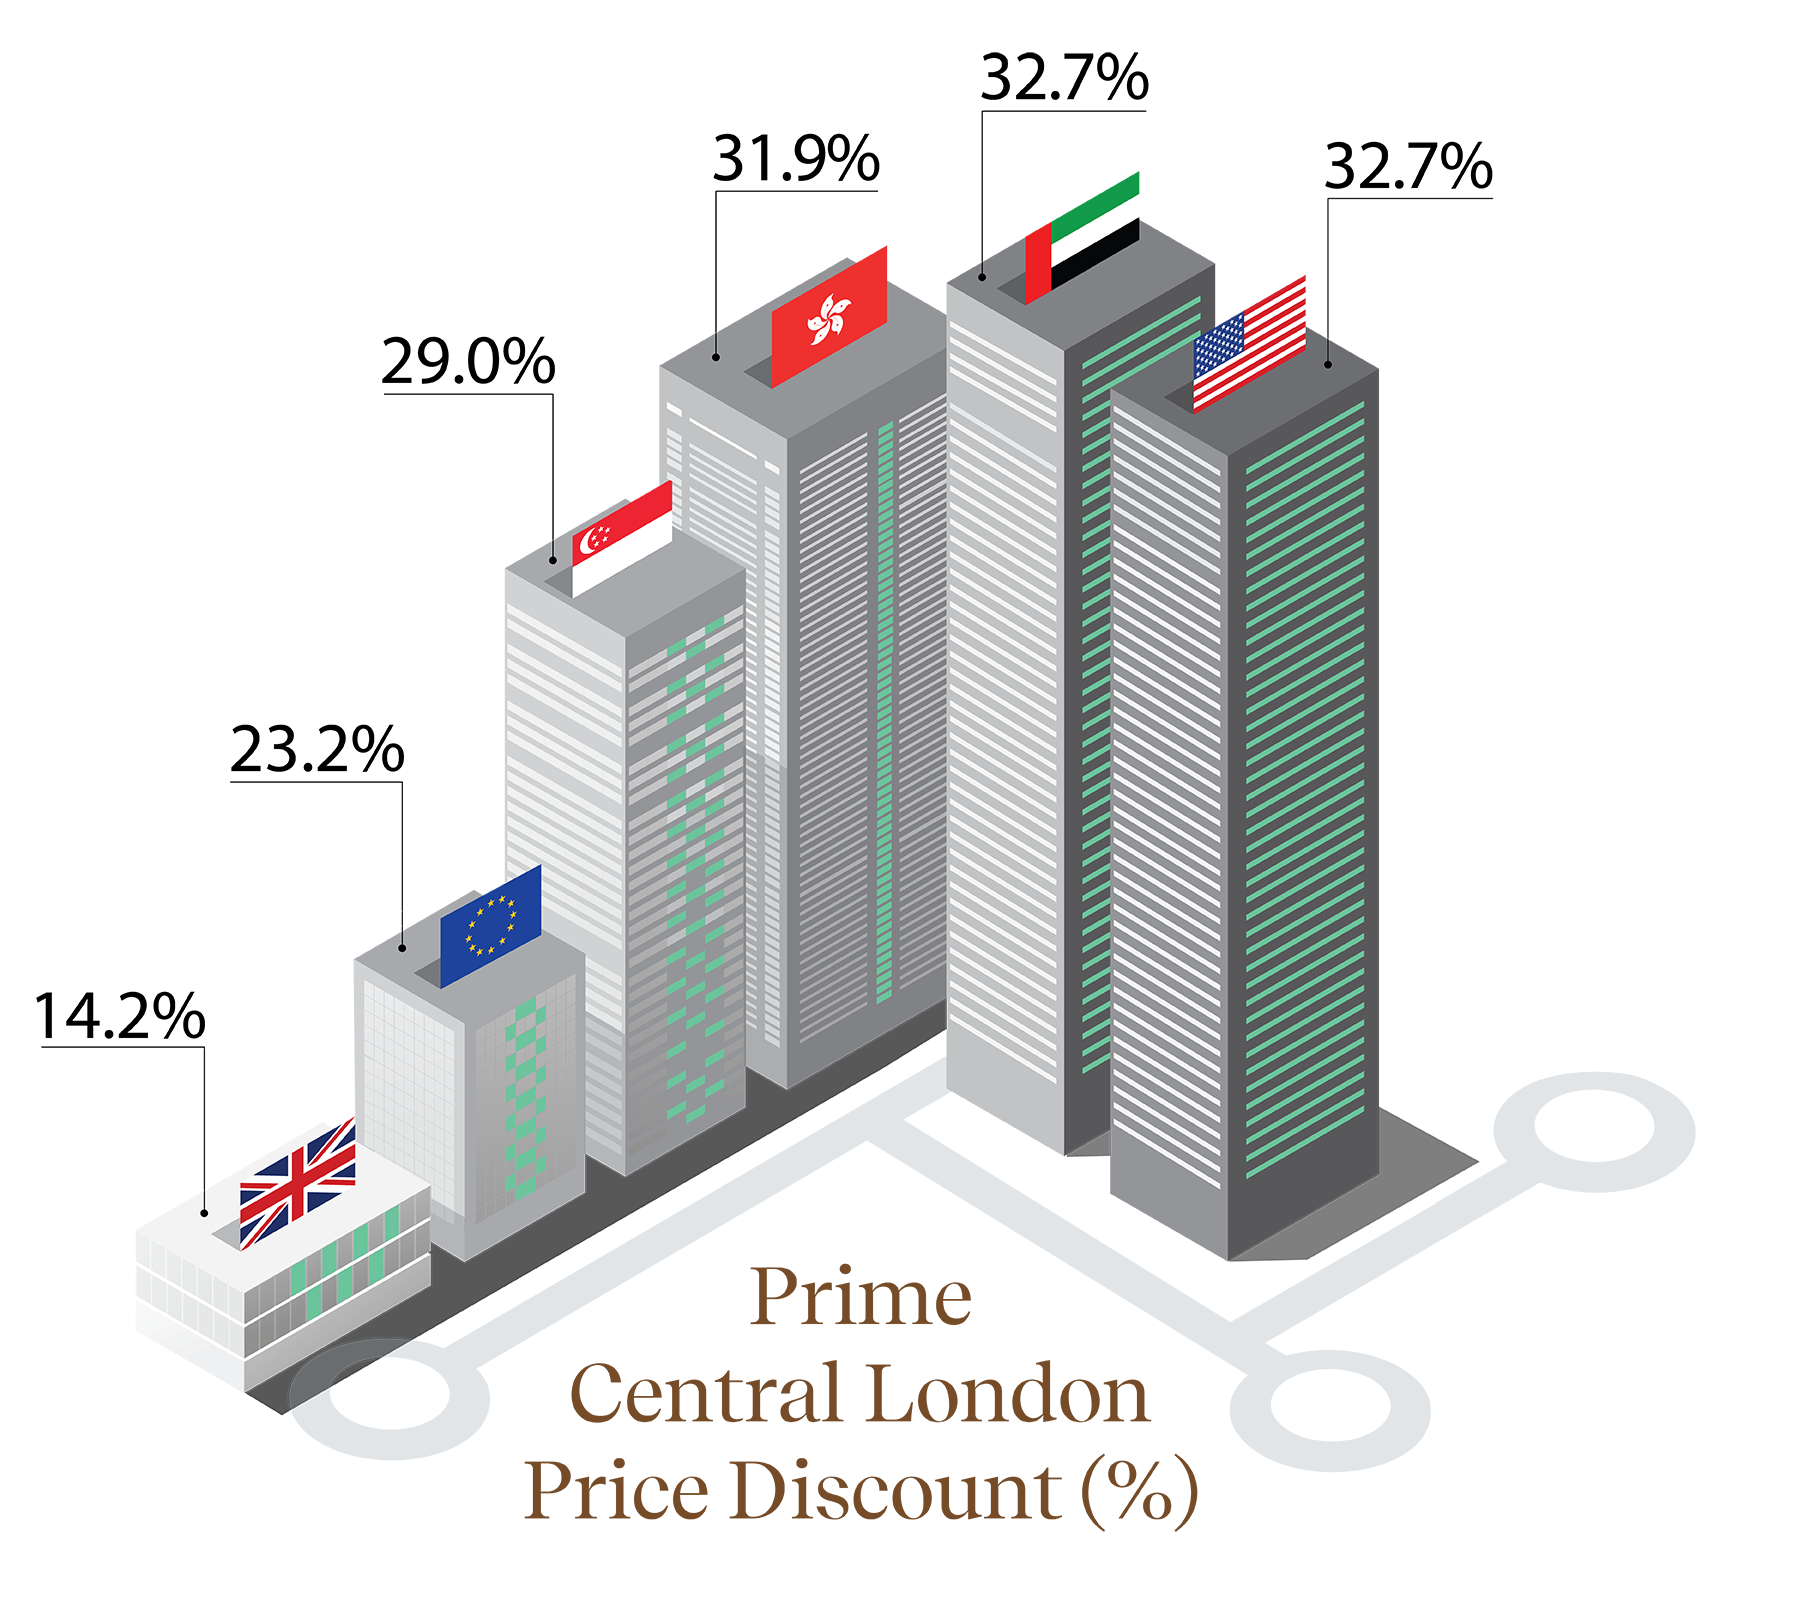 If we consider the Prime Central London capital value discount (2014 vs 2022) and the pound depreciation, overseas buyers are receiving a healthy discount. Discounts range from 29% with the Singapore dollar, to 32.7% with the US dollar. A 32% discount on a £2.5 million property is £800,000. 